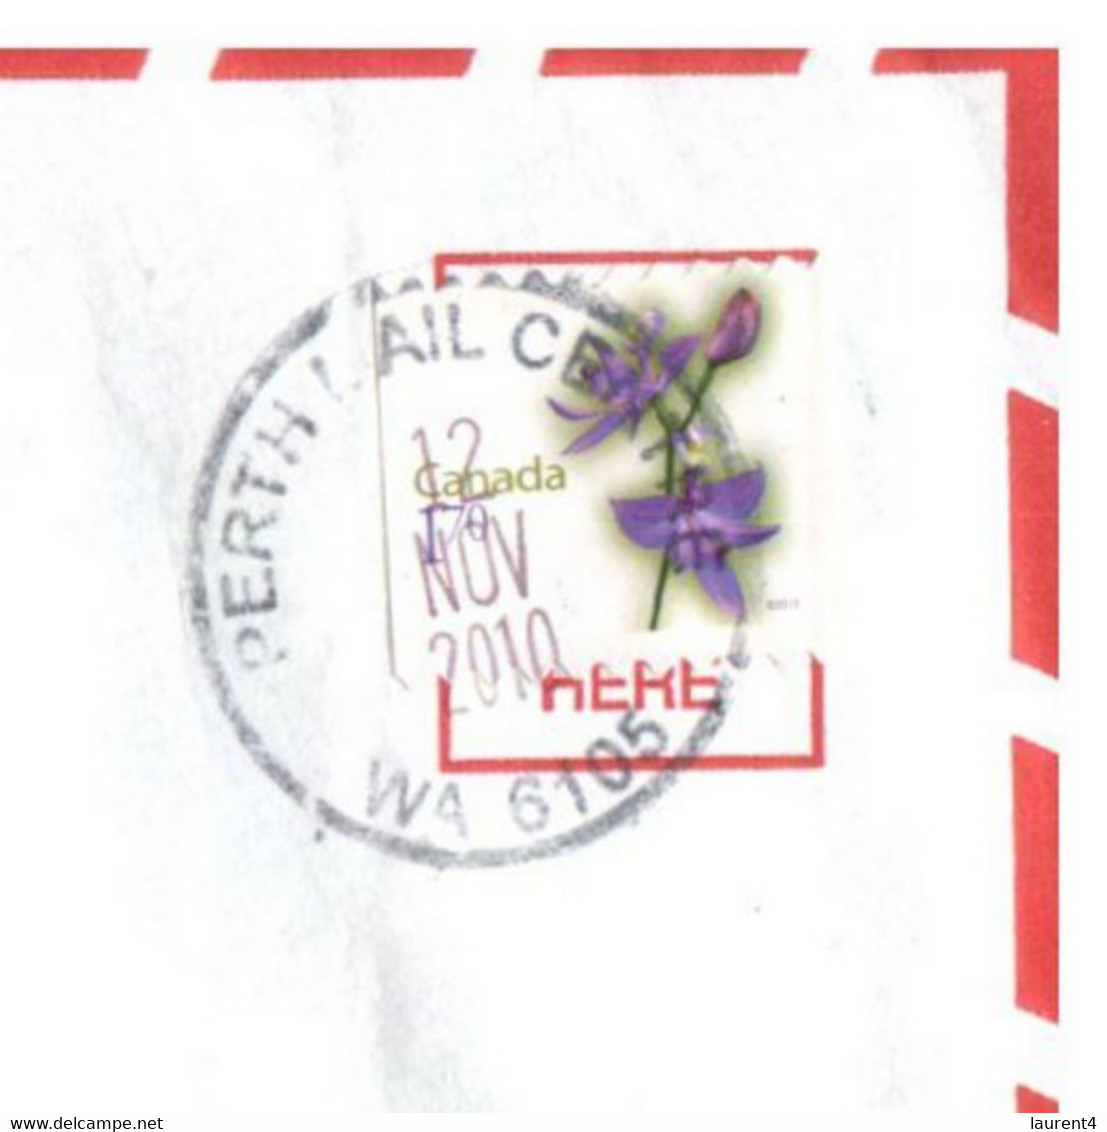 (SS 34) Australia - Letter Posted With "Illegal" Canadian Postage Stamp (still Went Through The Mail In 2014) - Errors, Freaks & Oddities (EFO)